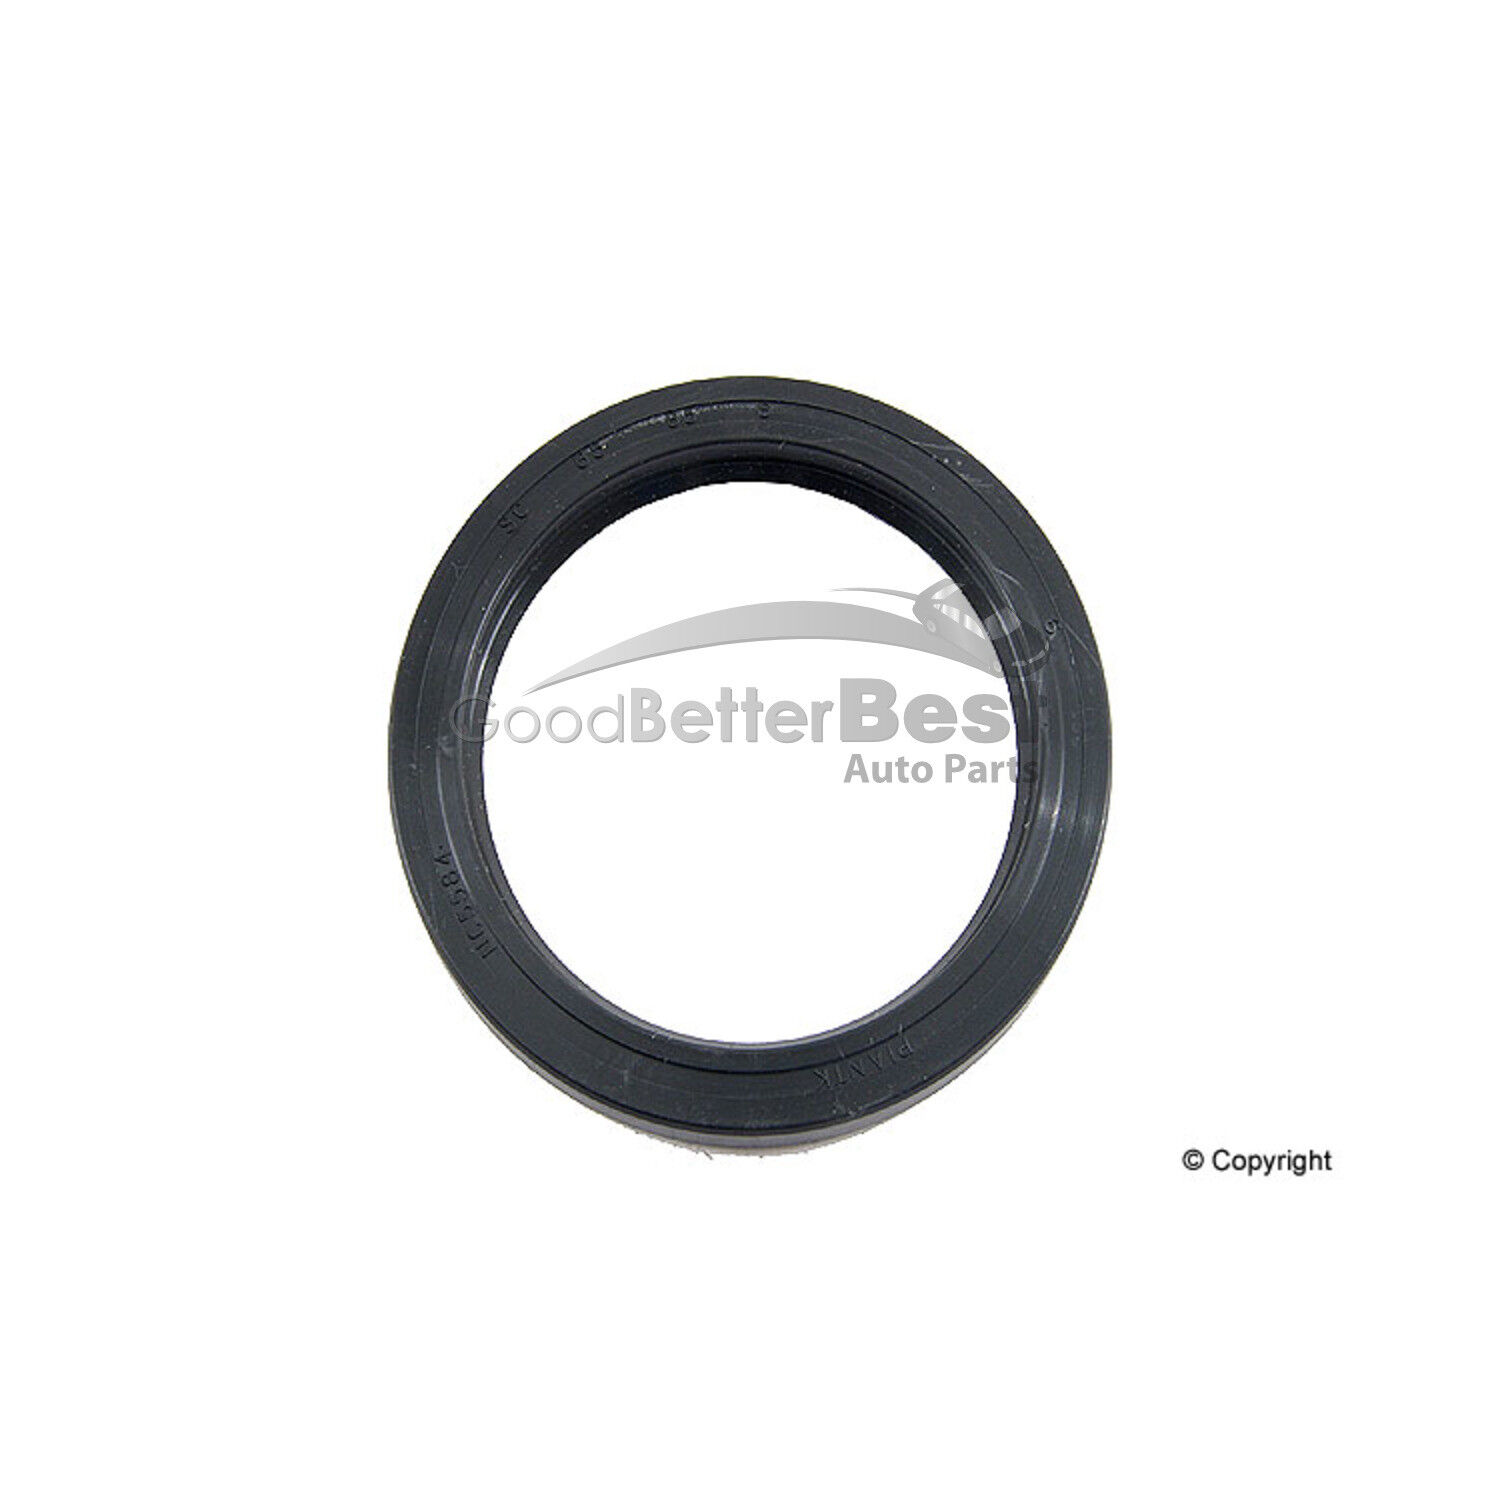 One New Goetze Wheel Seal Rear Outer 5031934200 99911323540 for Porsche 911 930